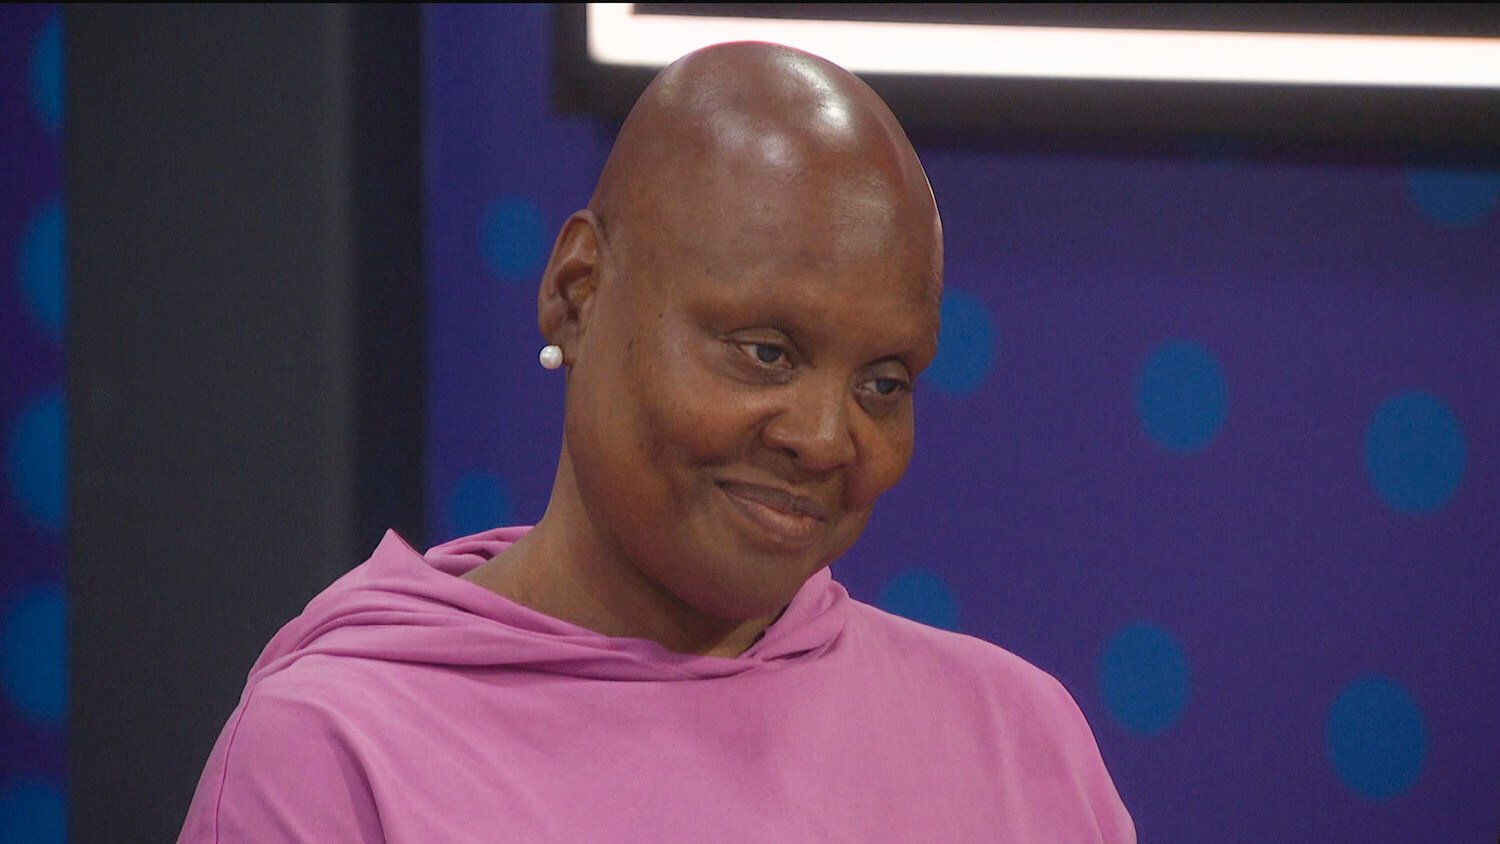 Felicia Cannon in 'Big Brother' Season 25 Week 6, where she likely faces eviction